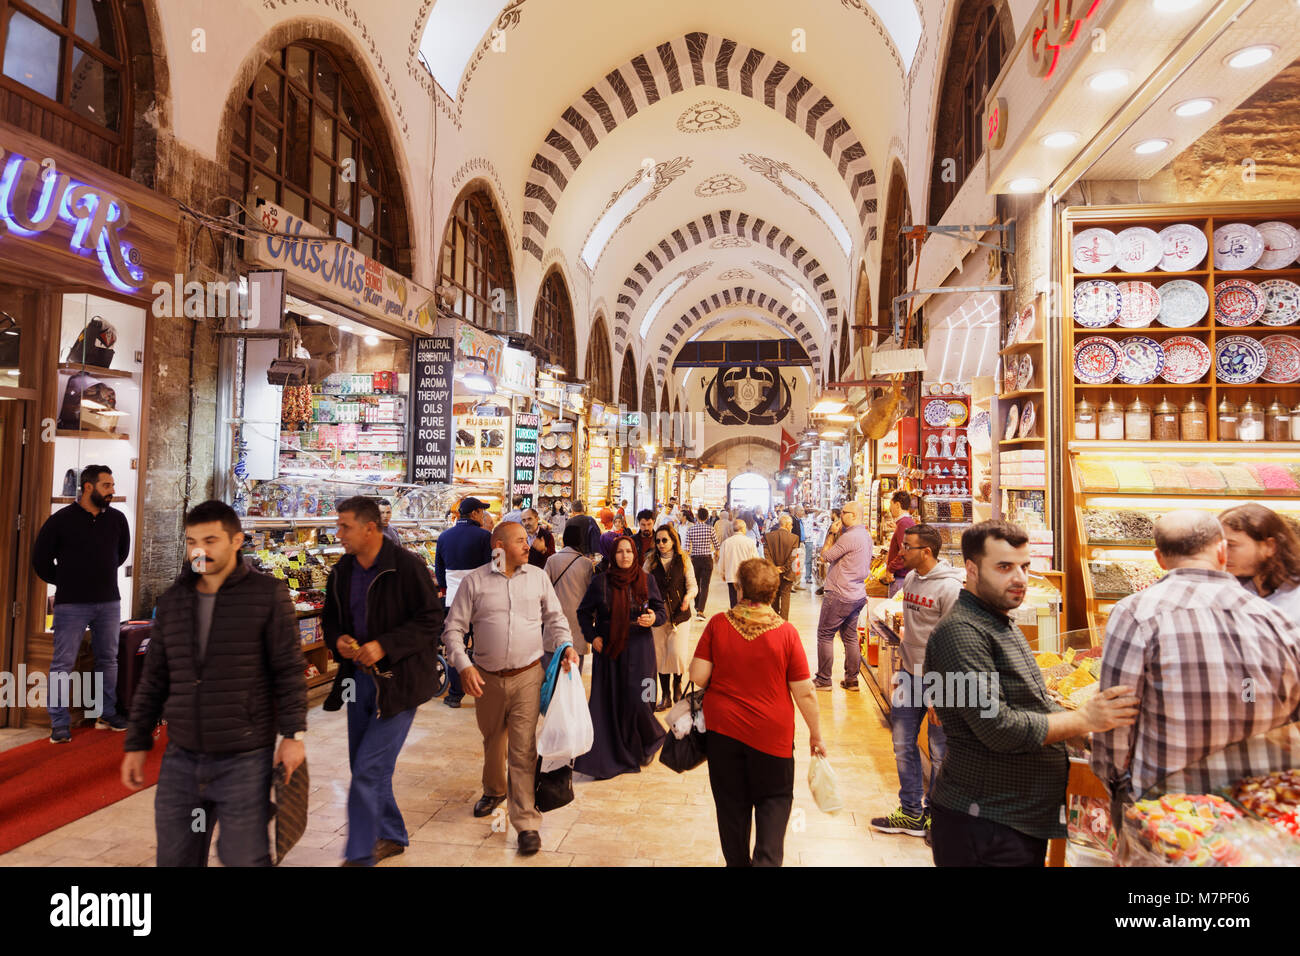 Istanbul, Turkey - October 13, 2017: People in the Spice Bazaar. It's the second largest covered shopping complex in the city after the Grand Bazaar Stock Photo